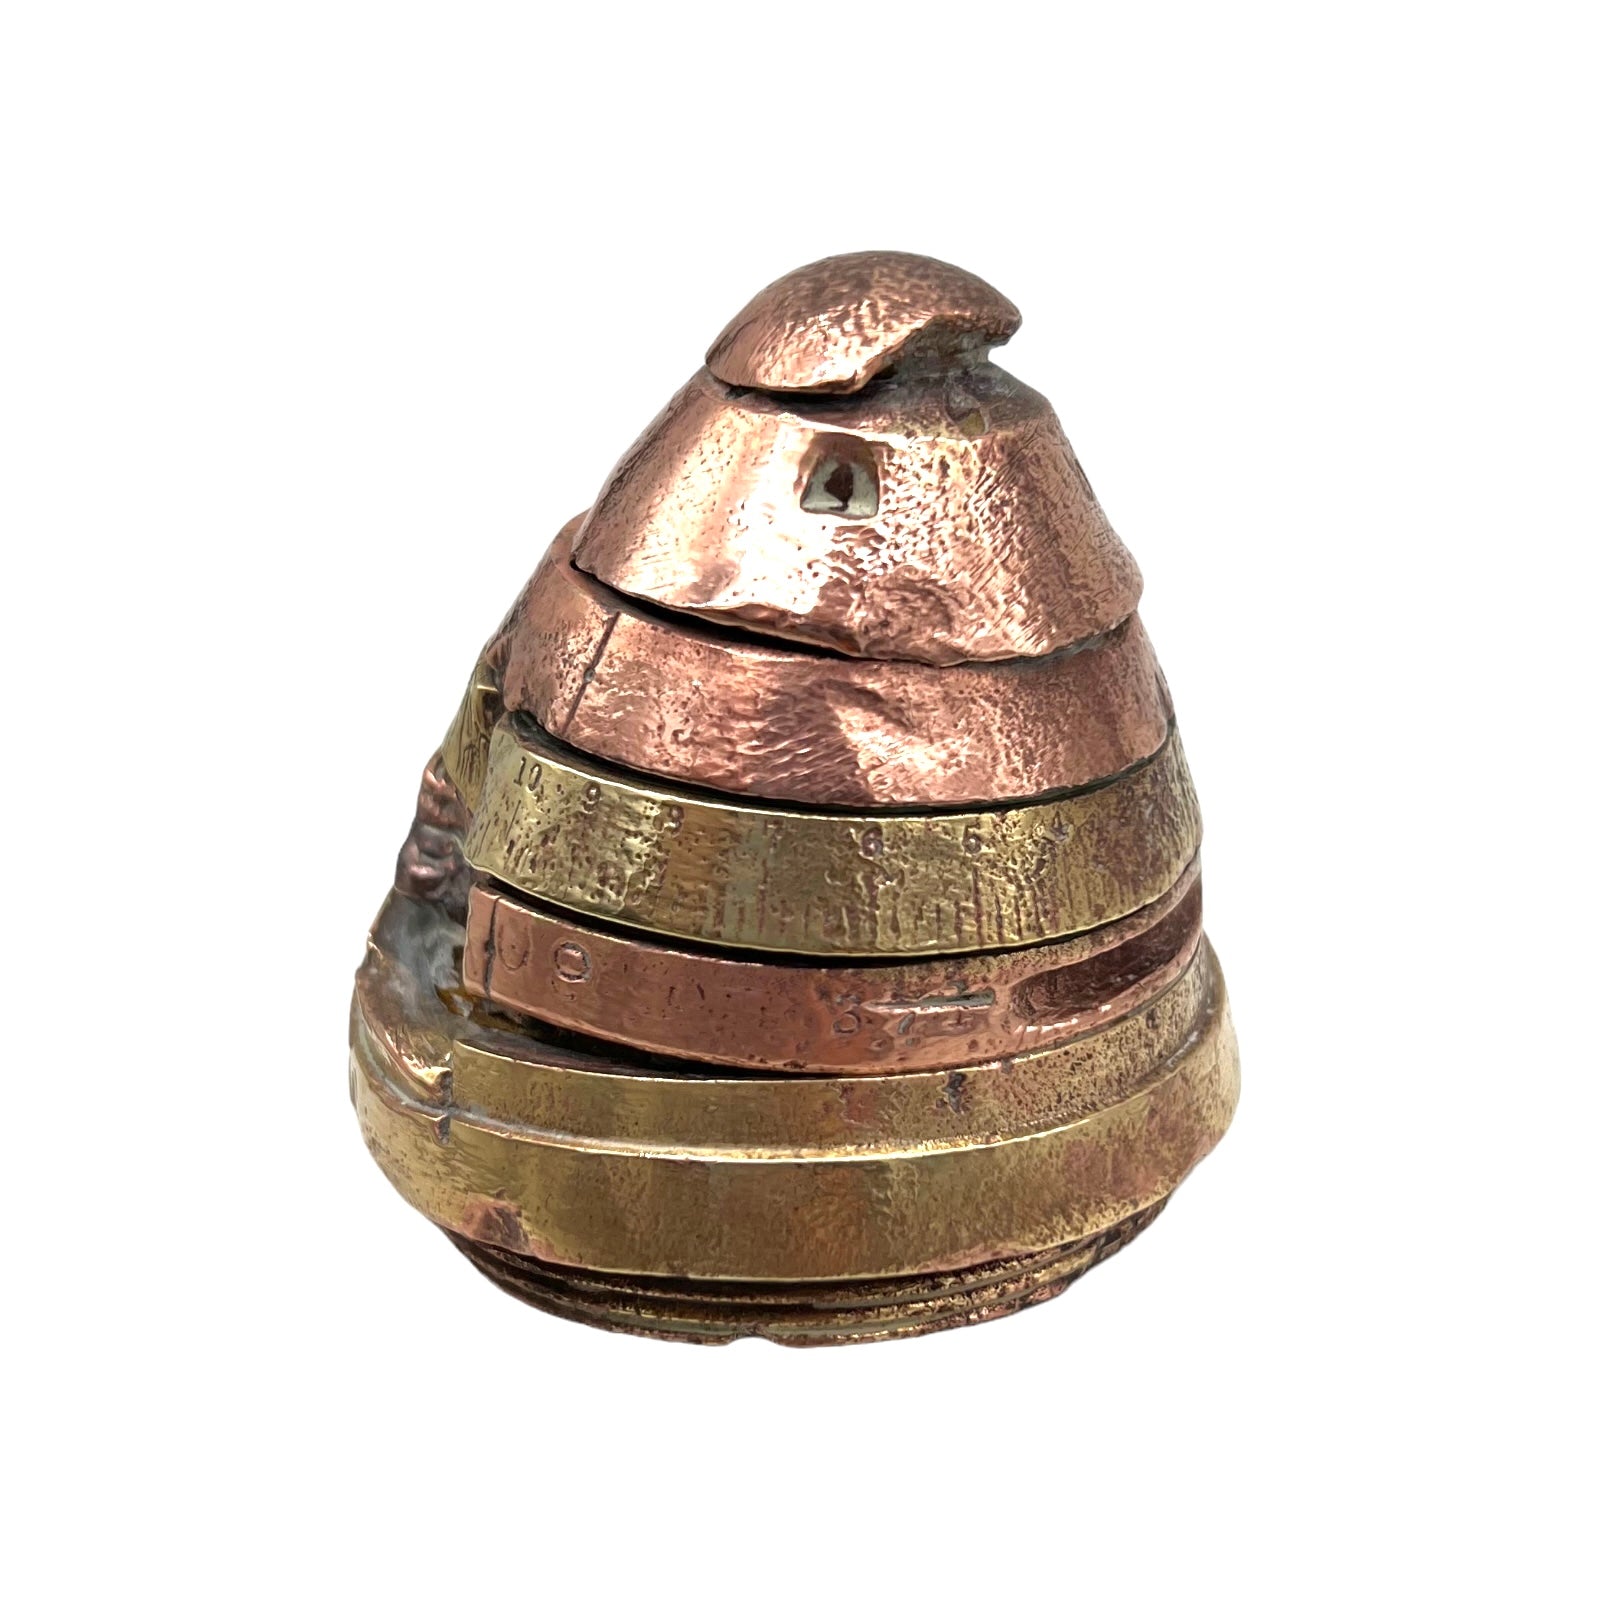 British WW1 brass fuse ideal as a paperweight